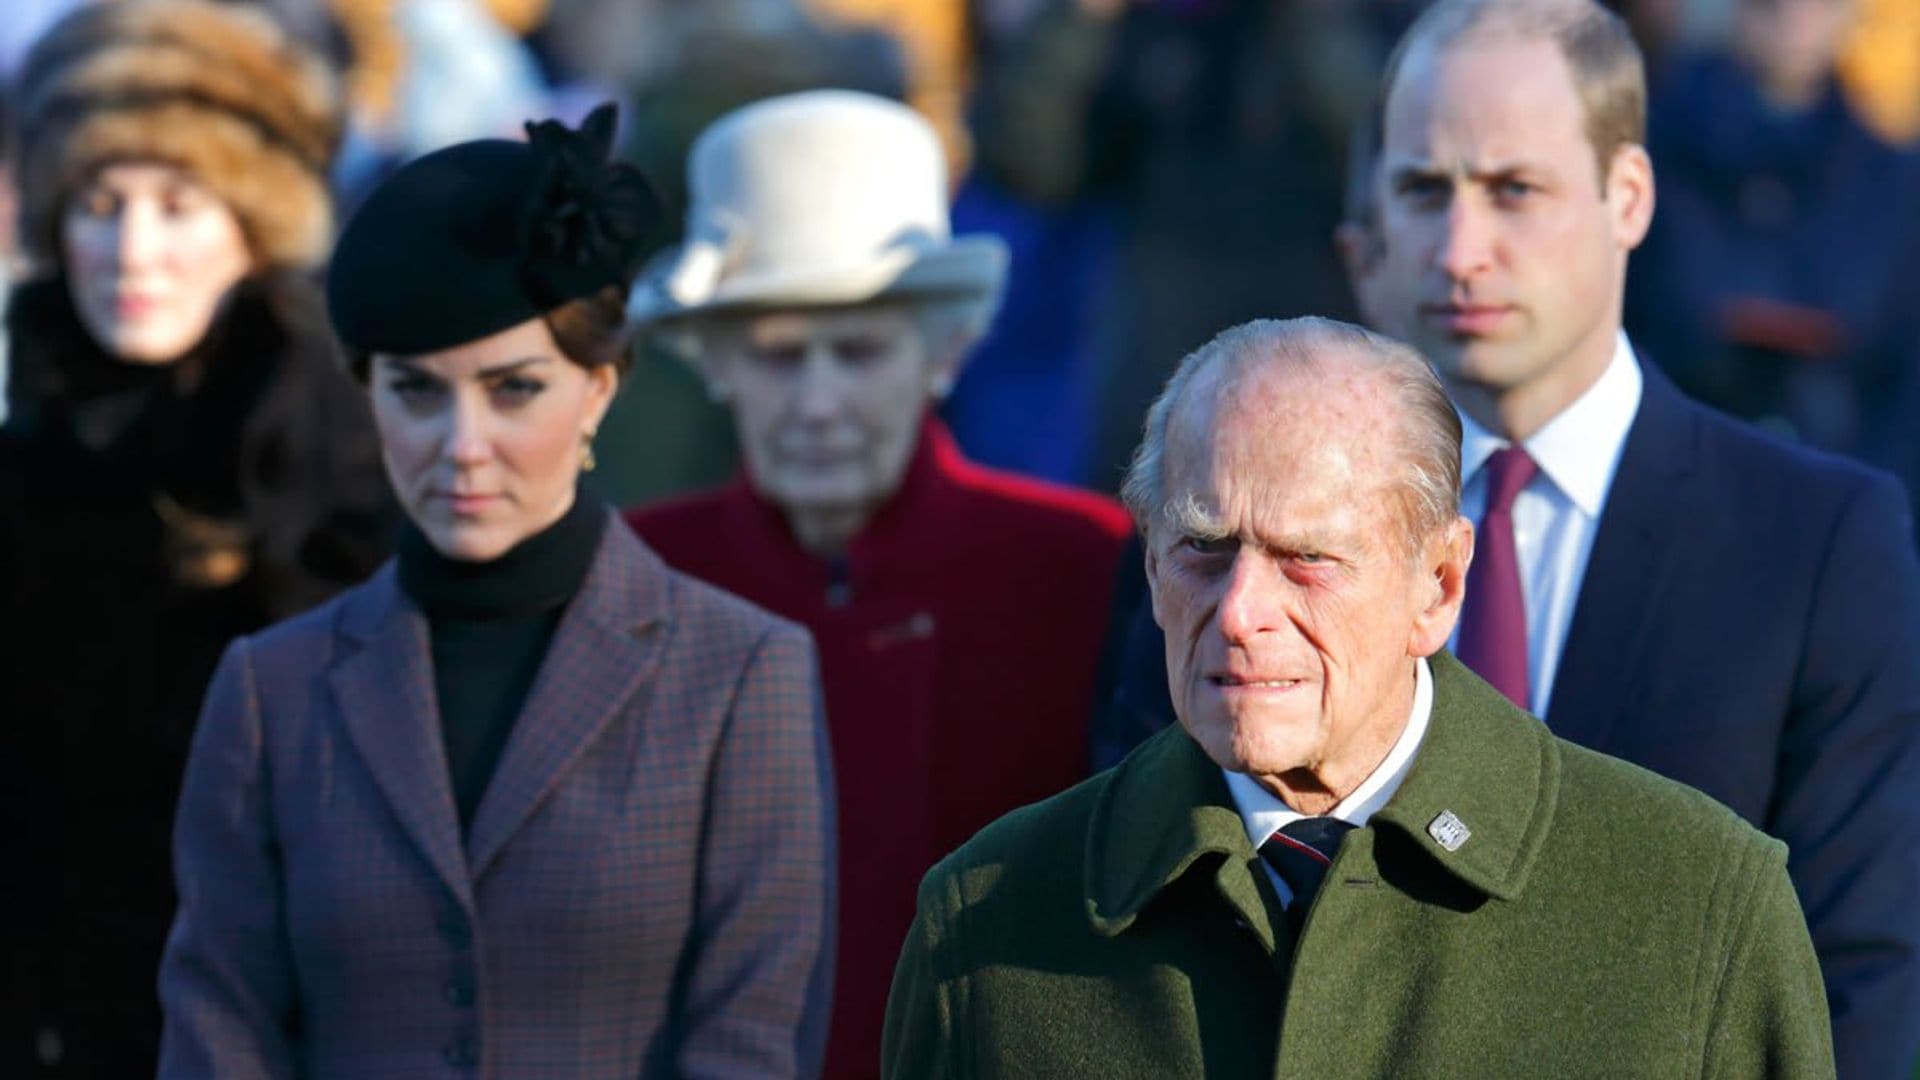 Prince William and Kate Middleton mourning Prince Philip's death